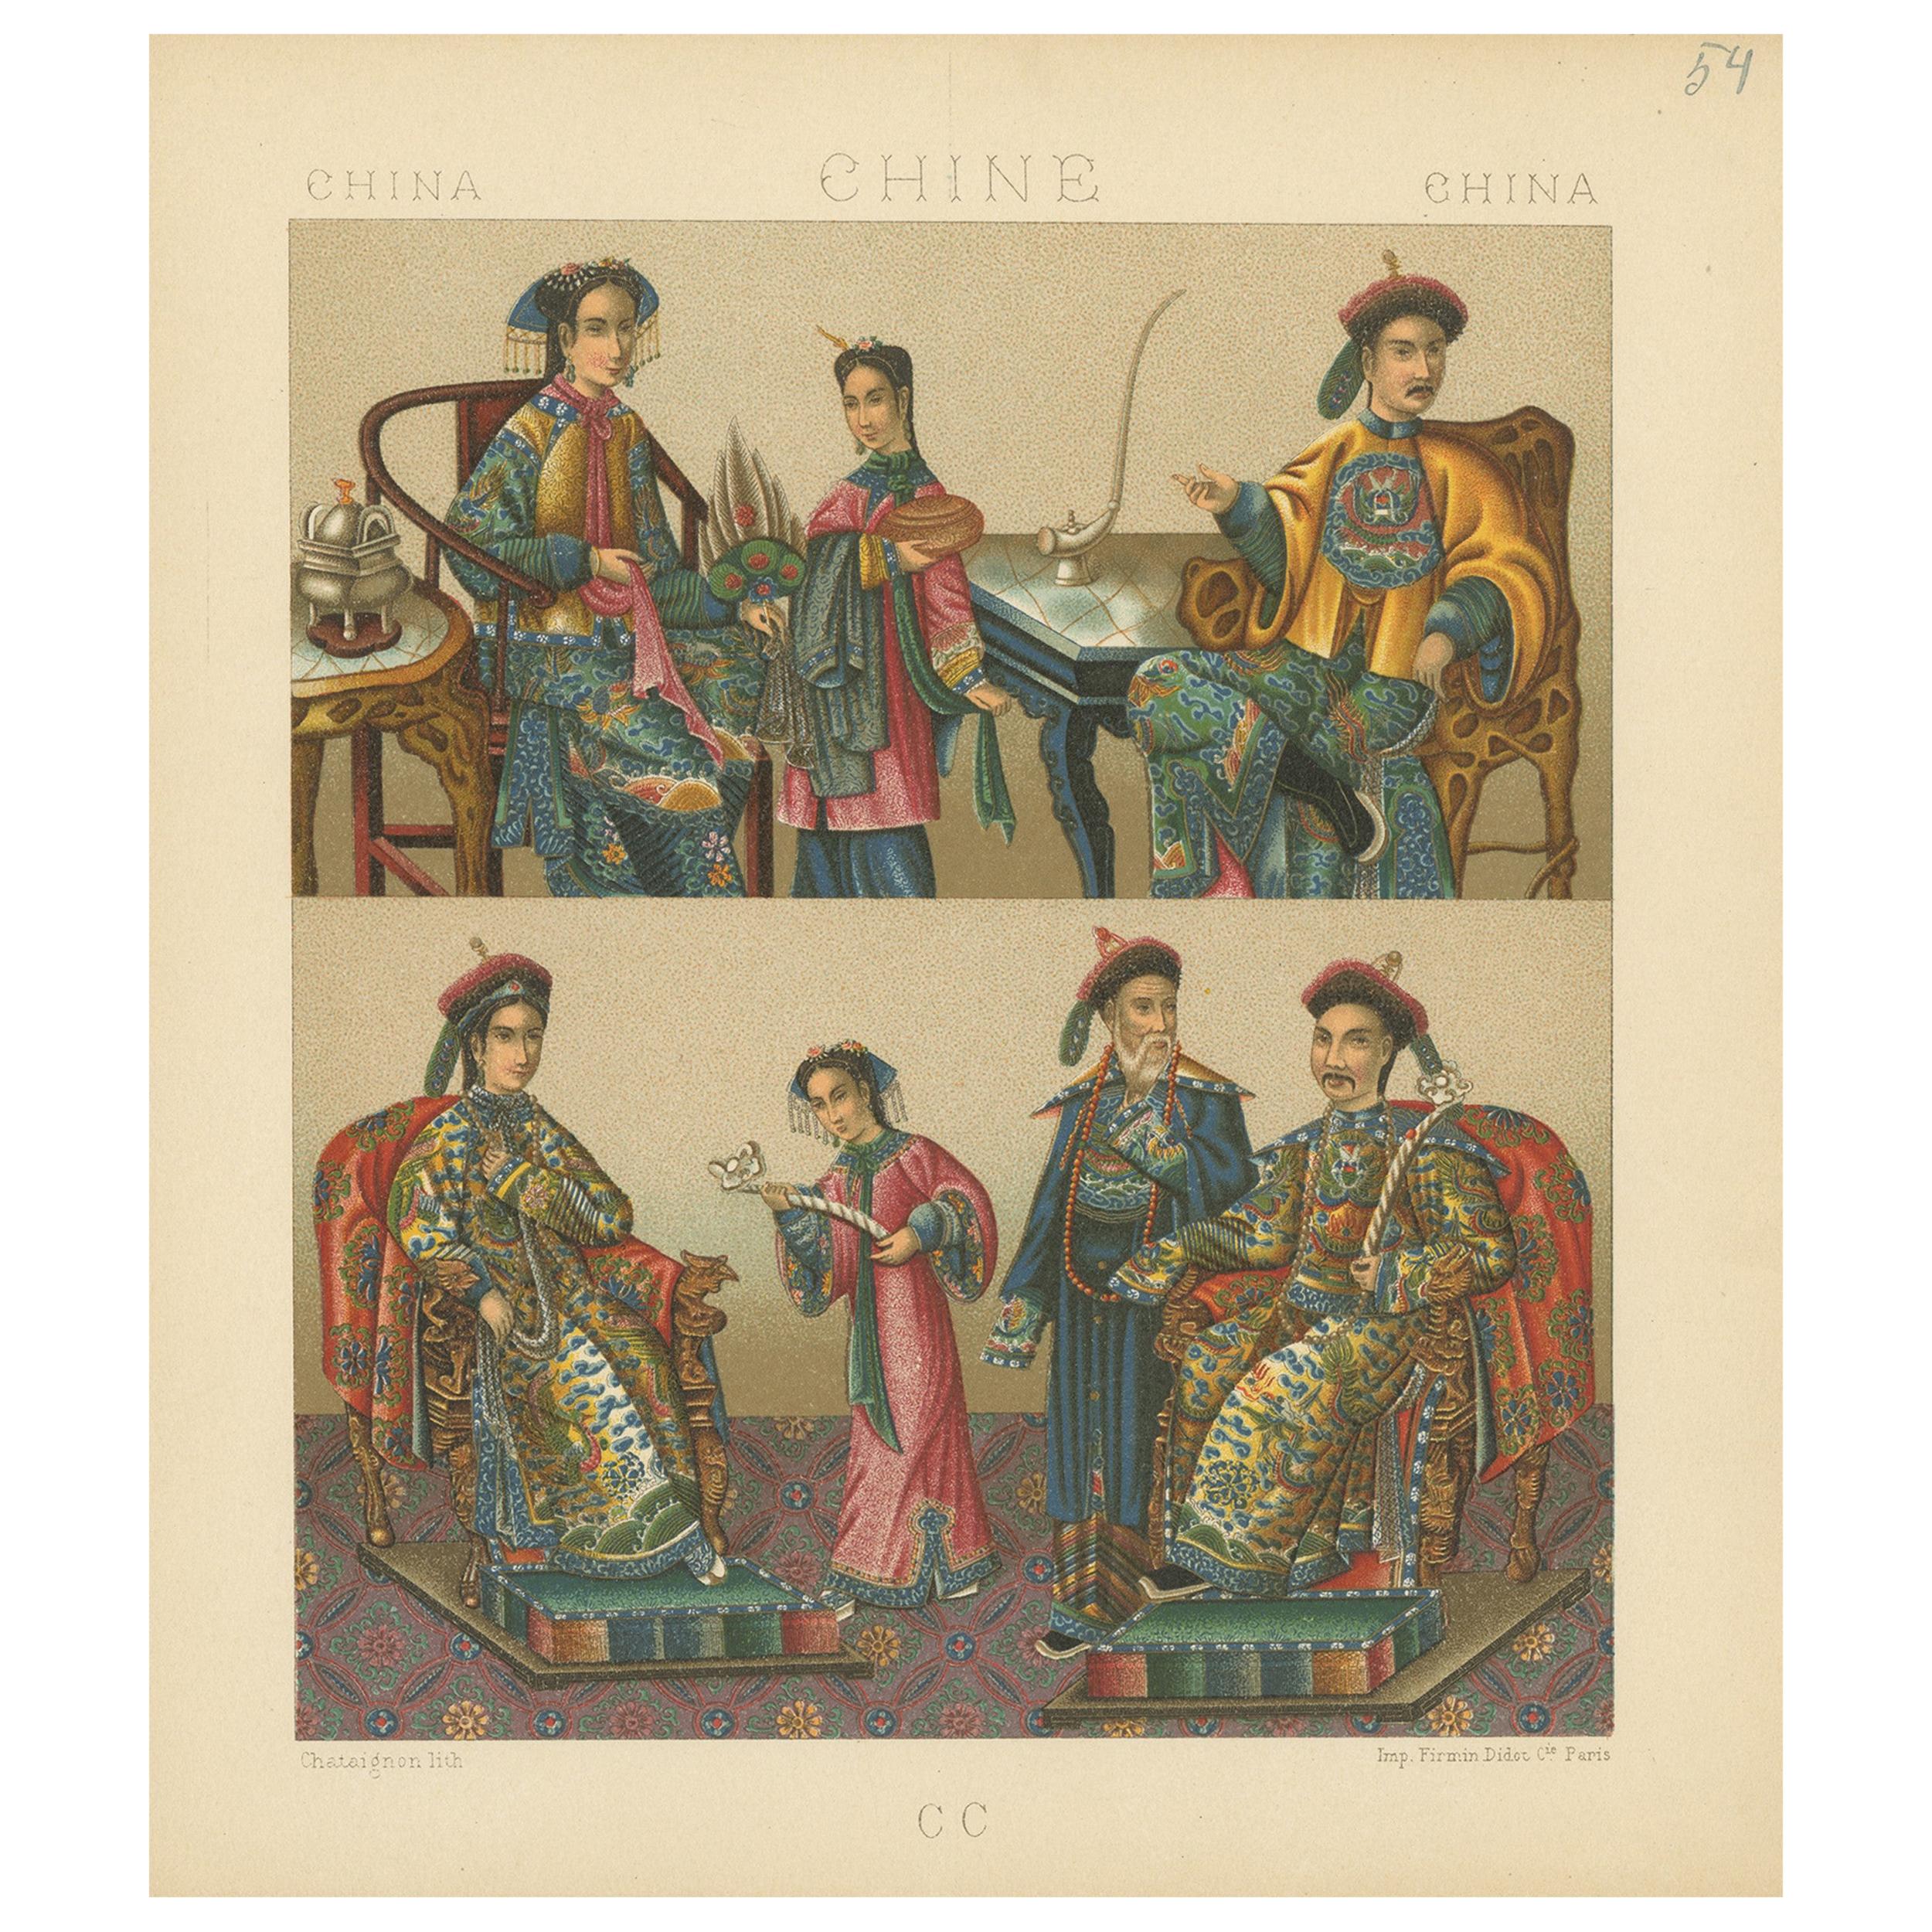 Pl. 54 Antique Print of Chinese Costumes by Racinet, 'circa 1880'